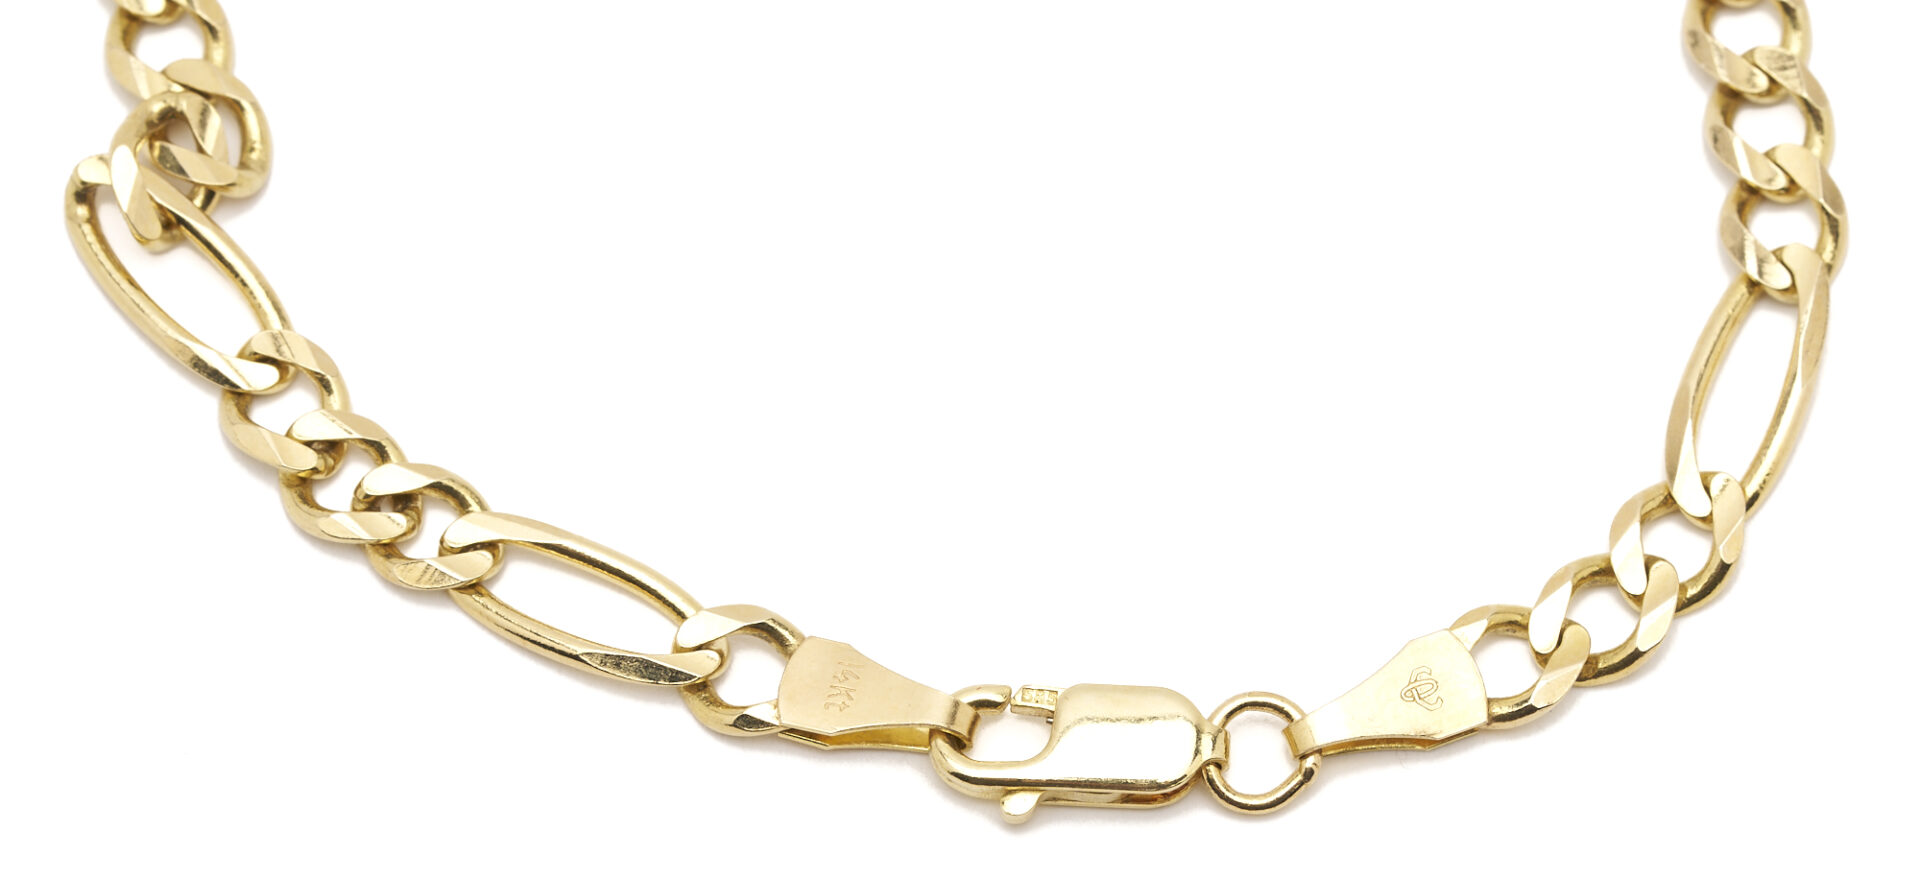 Lot 687: 14K Gold Figaro Chain Necklace